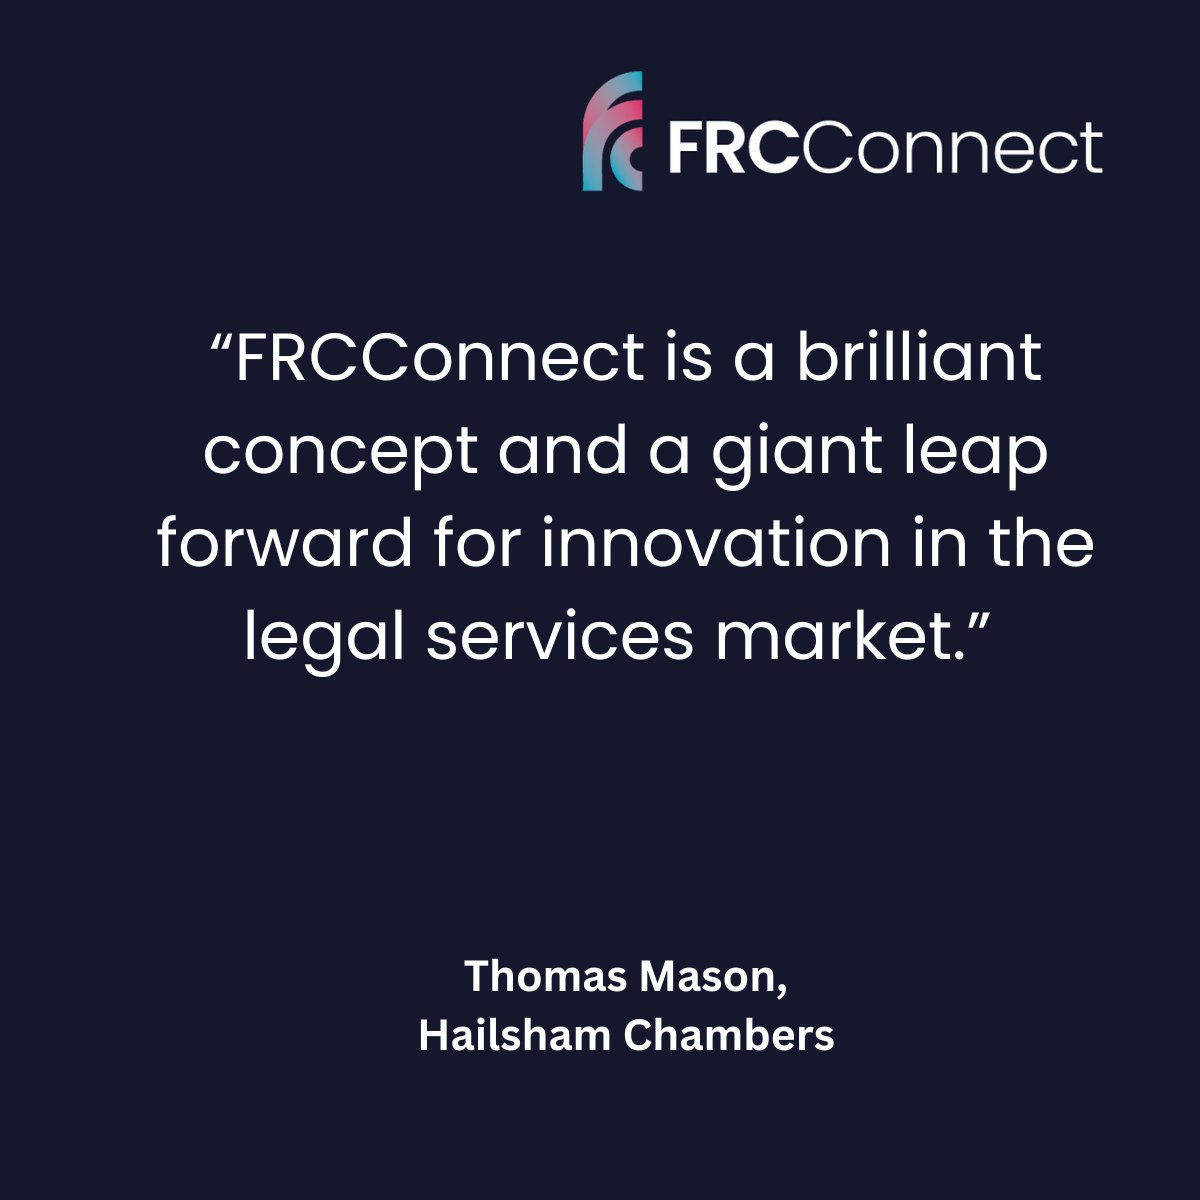 “FRCConnect is a brilliant concept and a giant leap forward for innovation in the legal services market. This is something that has never done before and is exactly the kind of innovation the industry needs.”

Thomas Mason @Hailsham_Chamb